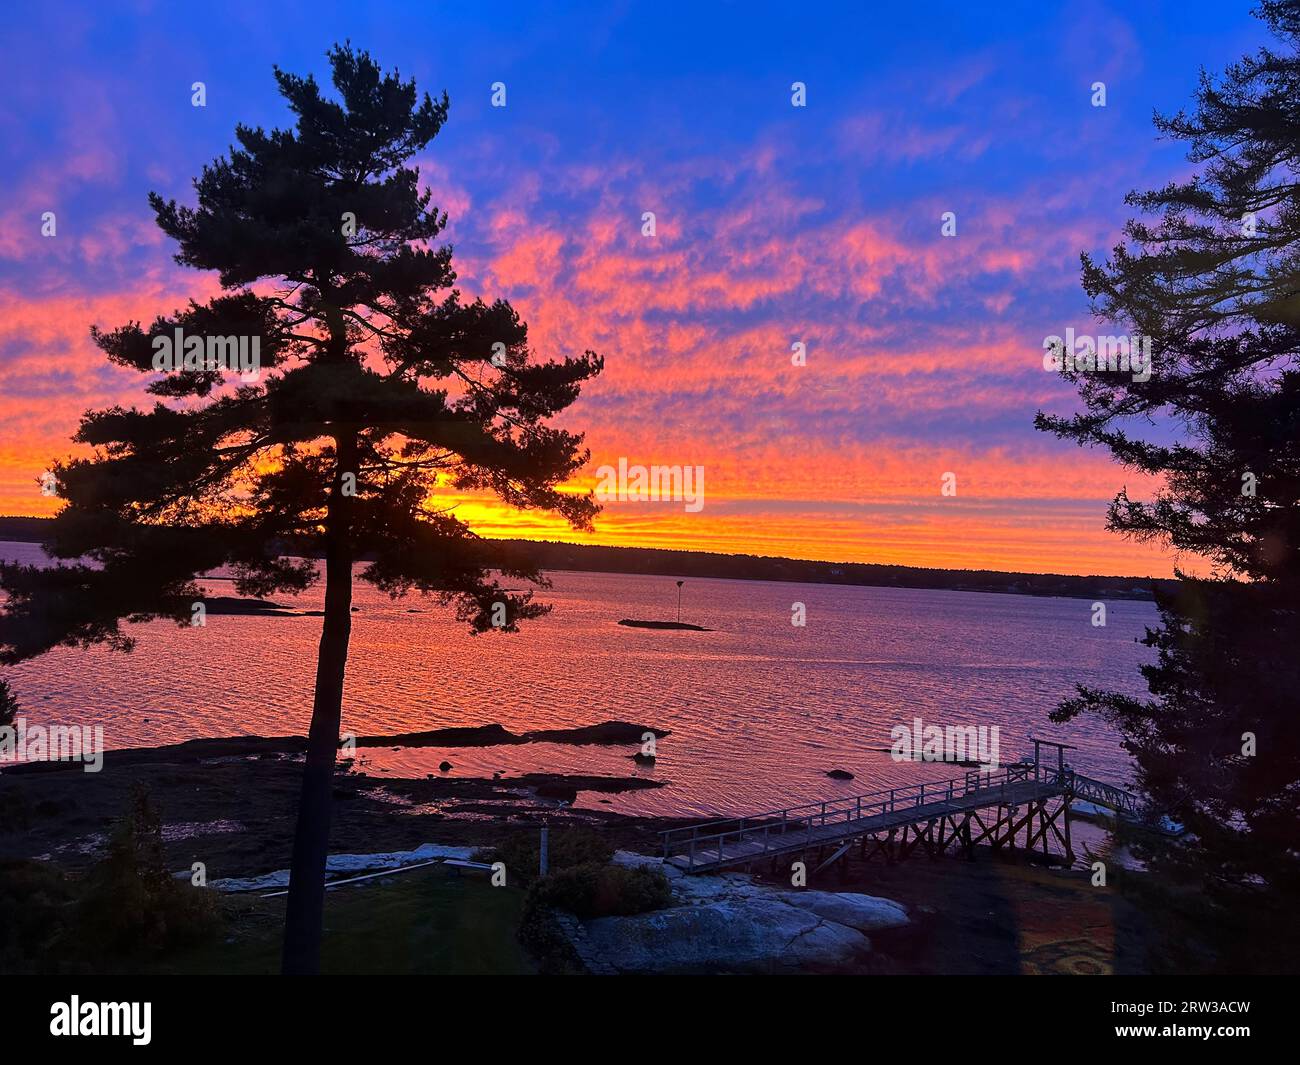 This photo was taken the night of September 15 (the night before Hurricane Lee hit the area). The sun is setting behind Westport Island. The view is from Sawyers Island in Boothbay, Maine. The waterway is the Sheepscot River. Stock Photo